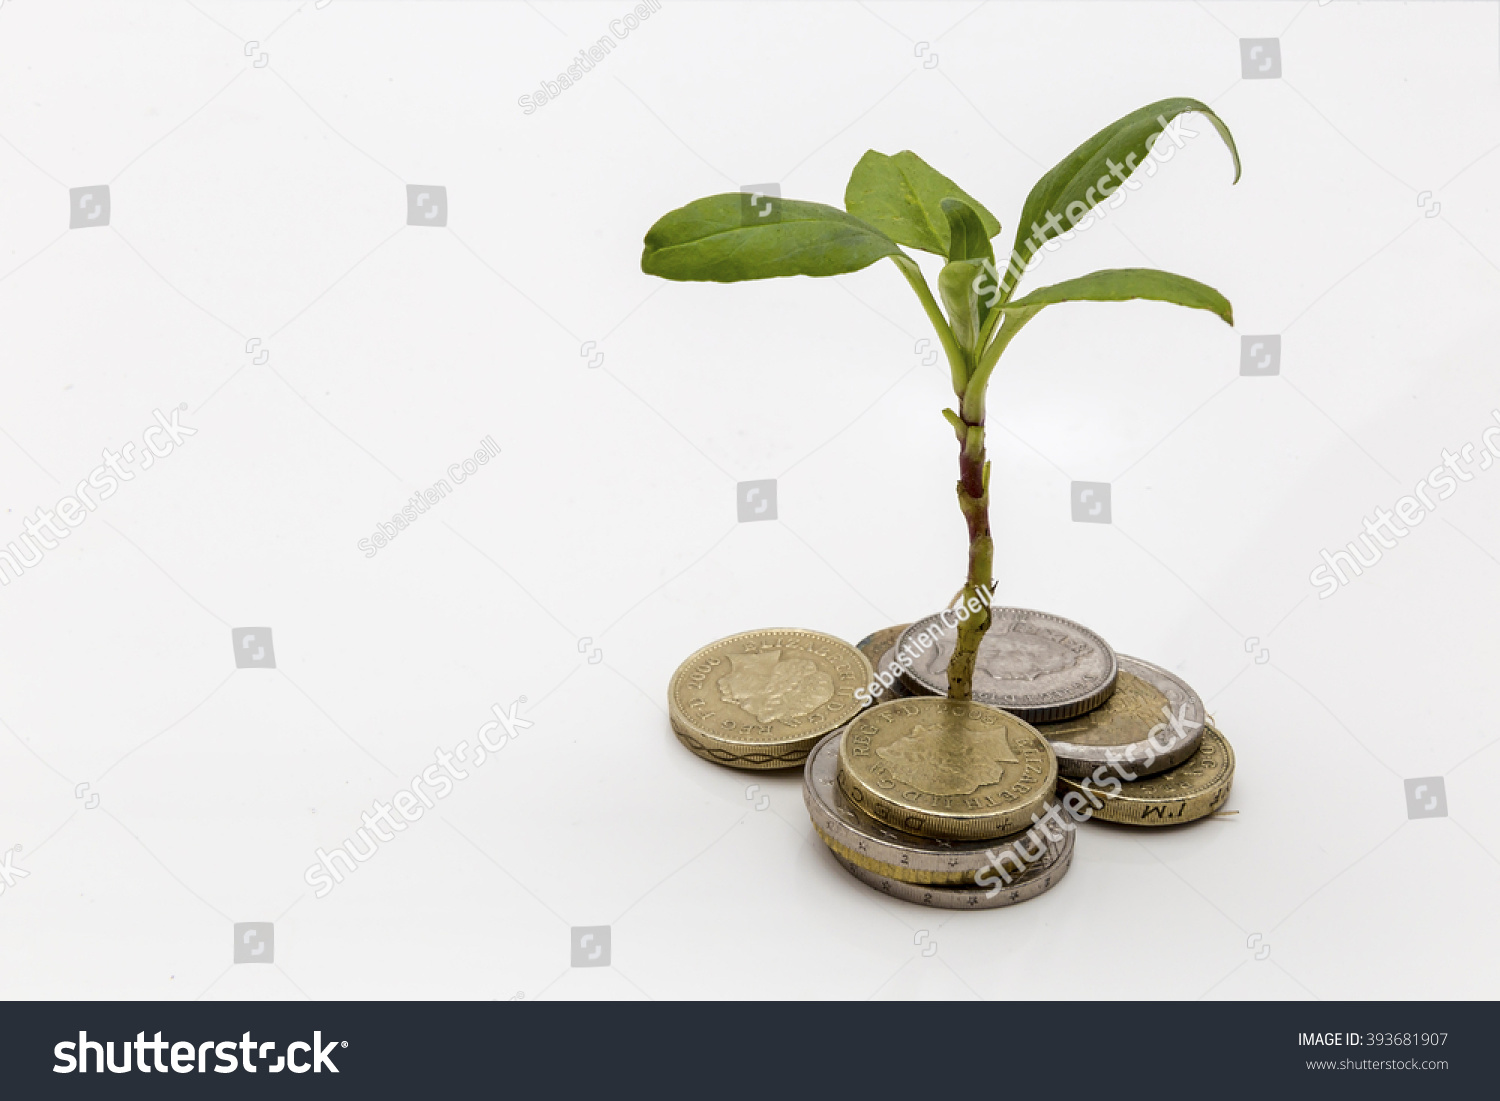 Showing a plant growing out of a pile of money symbolising investments and savings